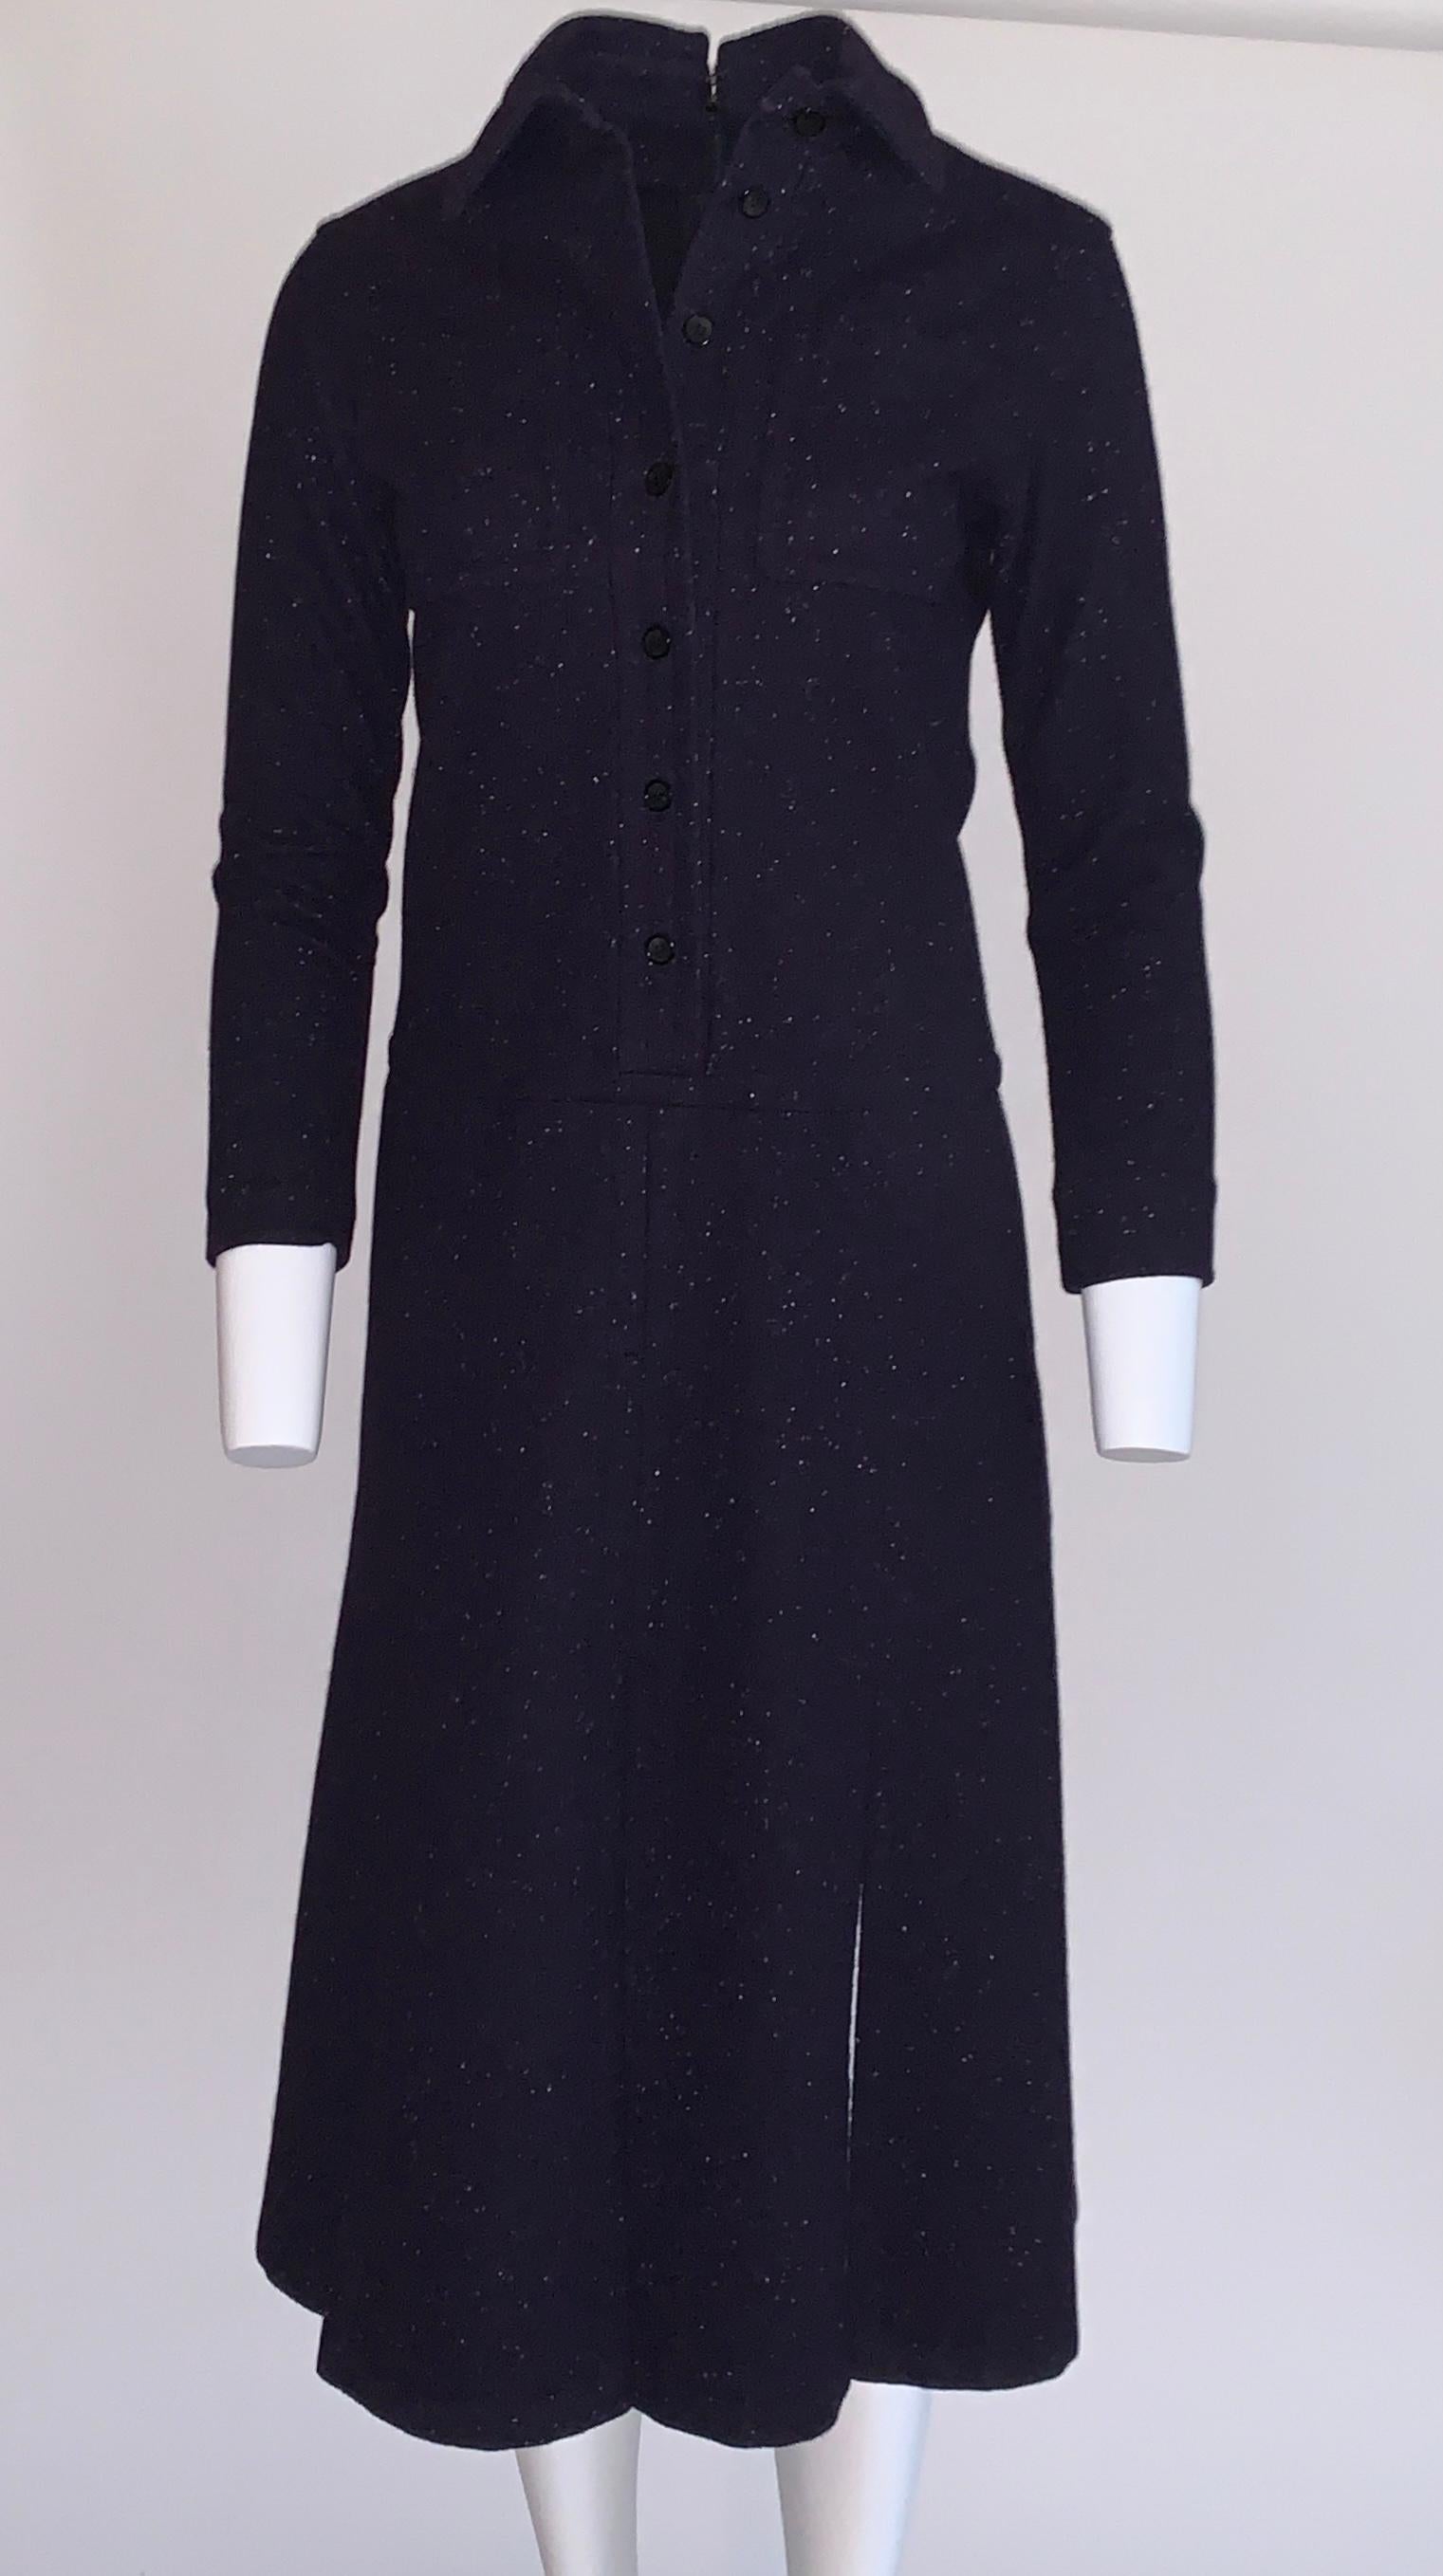 Vintage 1960s James Galanos for Amelia grey wool shirt dress in a navy blue mid-to-heavy weight wool with white speckles throughout. Button front at bodice with collar and patch pockets at chest. Pockets at side seams. Skirt has multiple slits, so